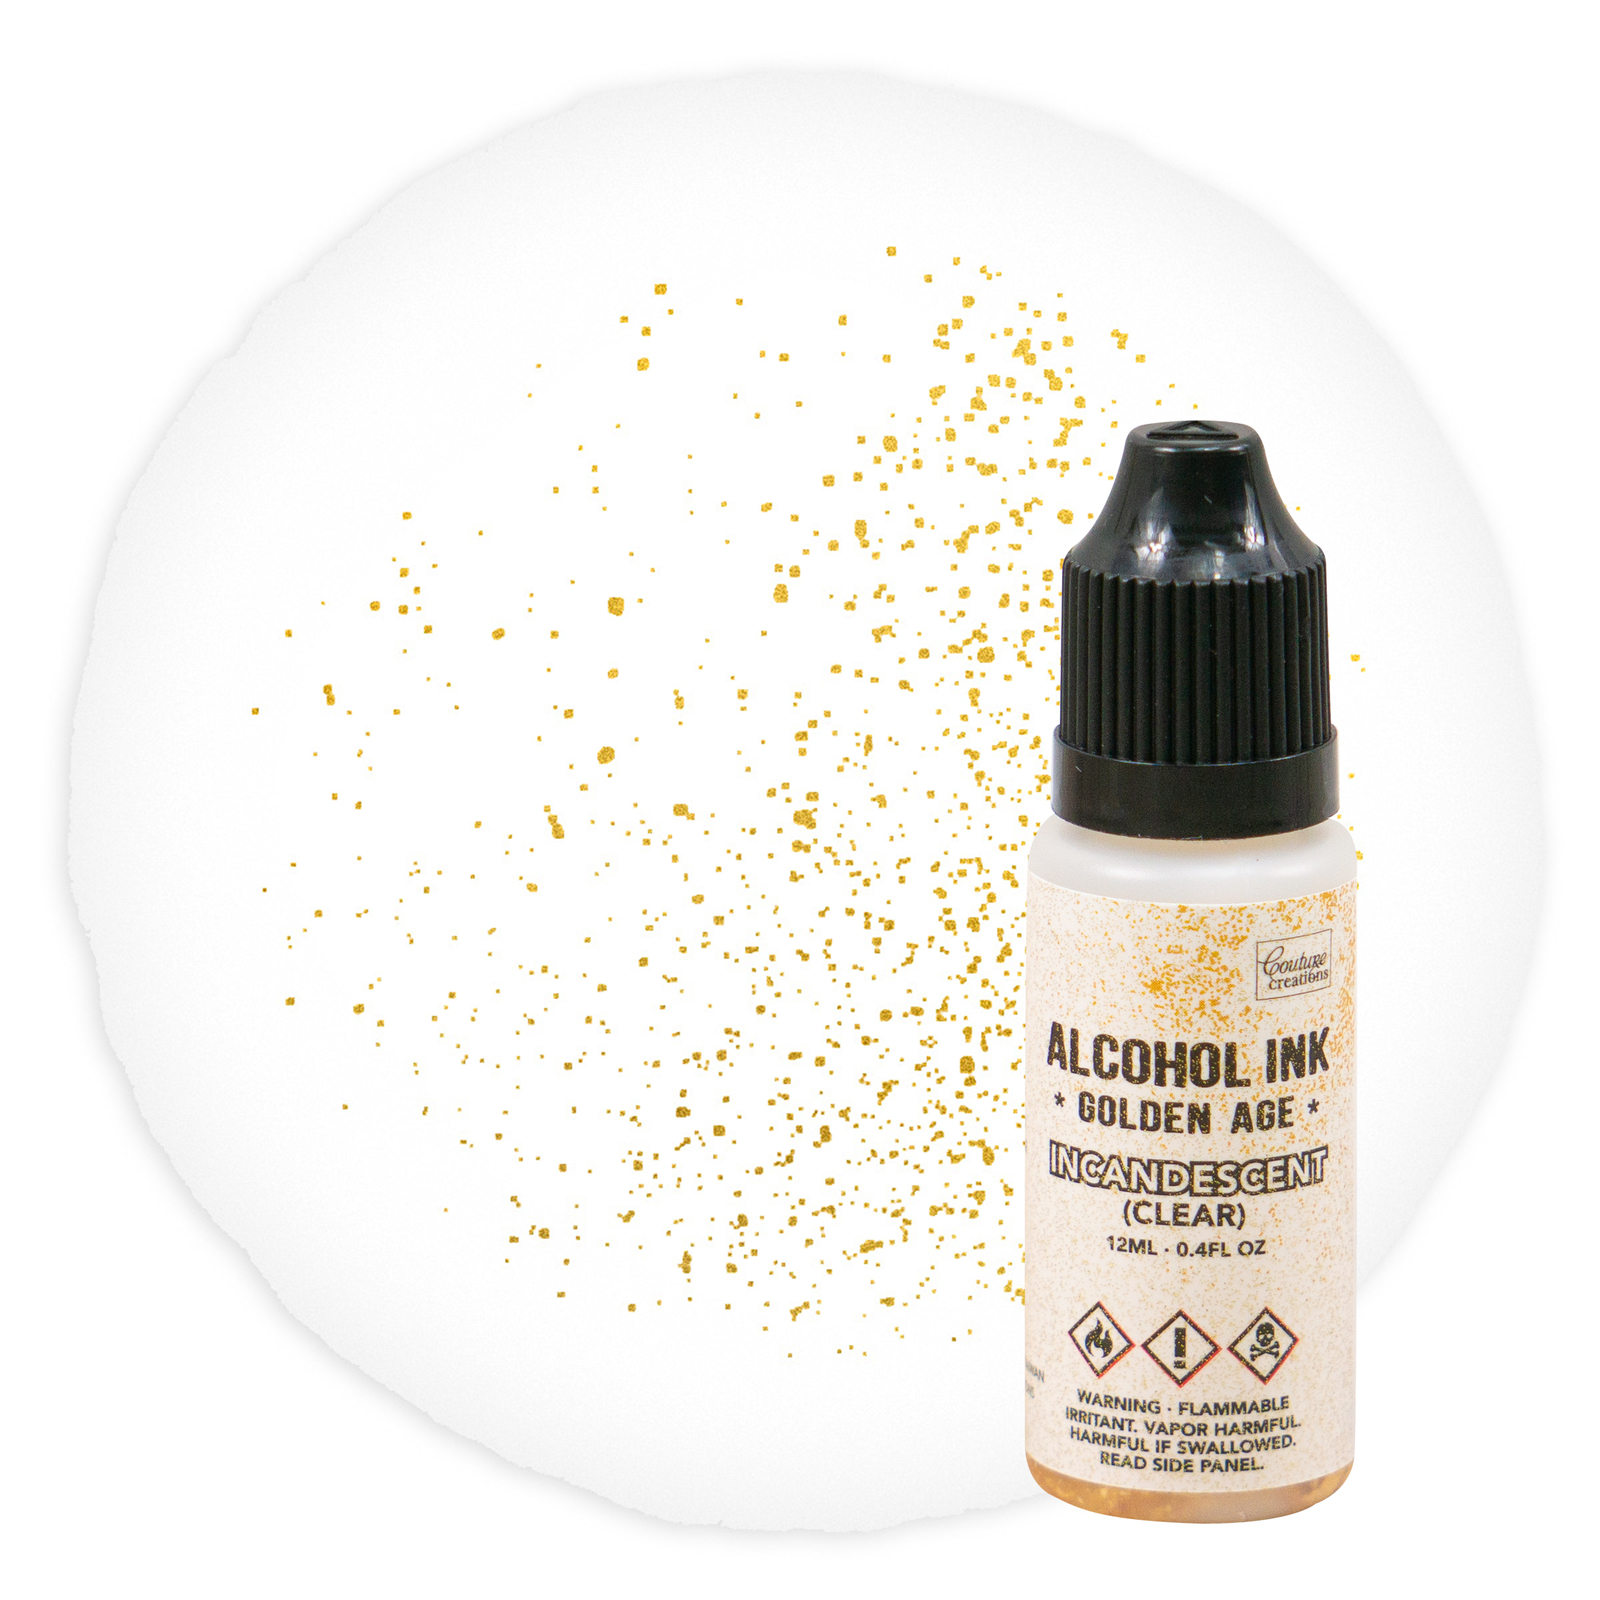 Couture Creations Alcohol Ink Golden Age Incandescent (clear) 12ml